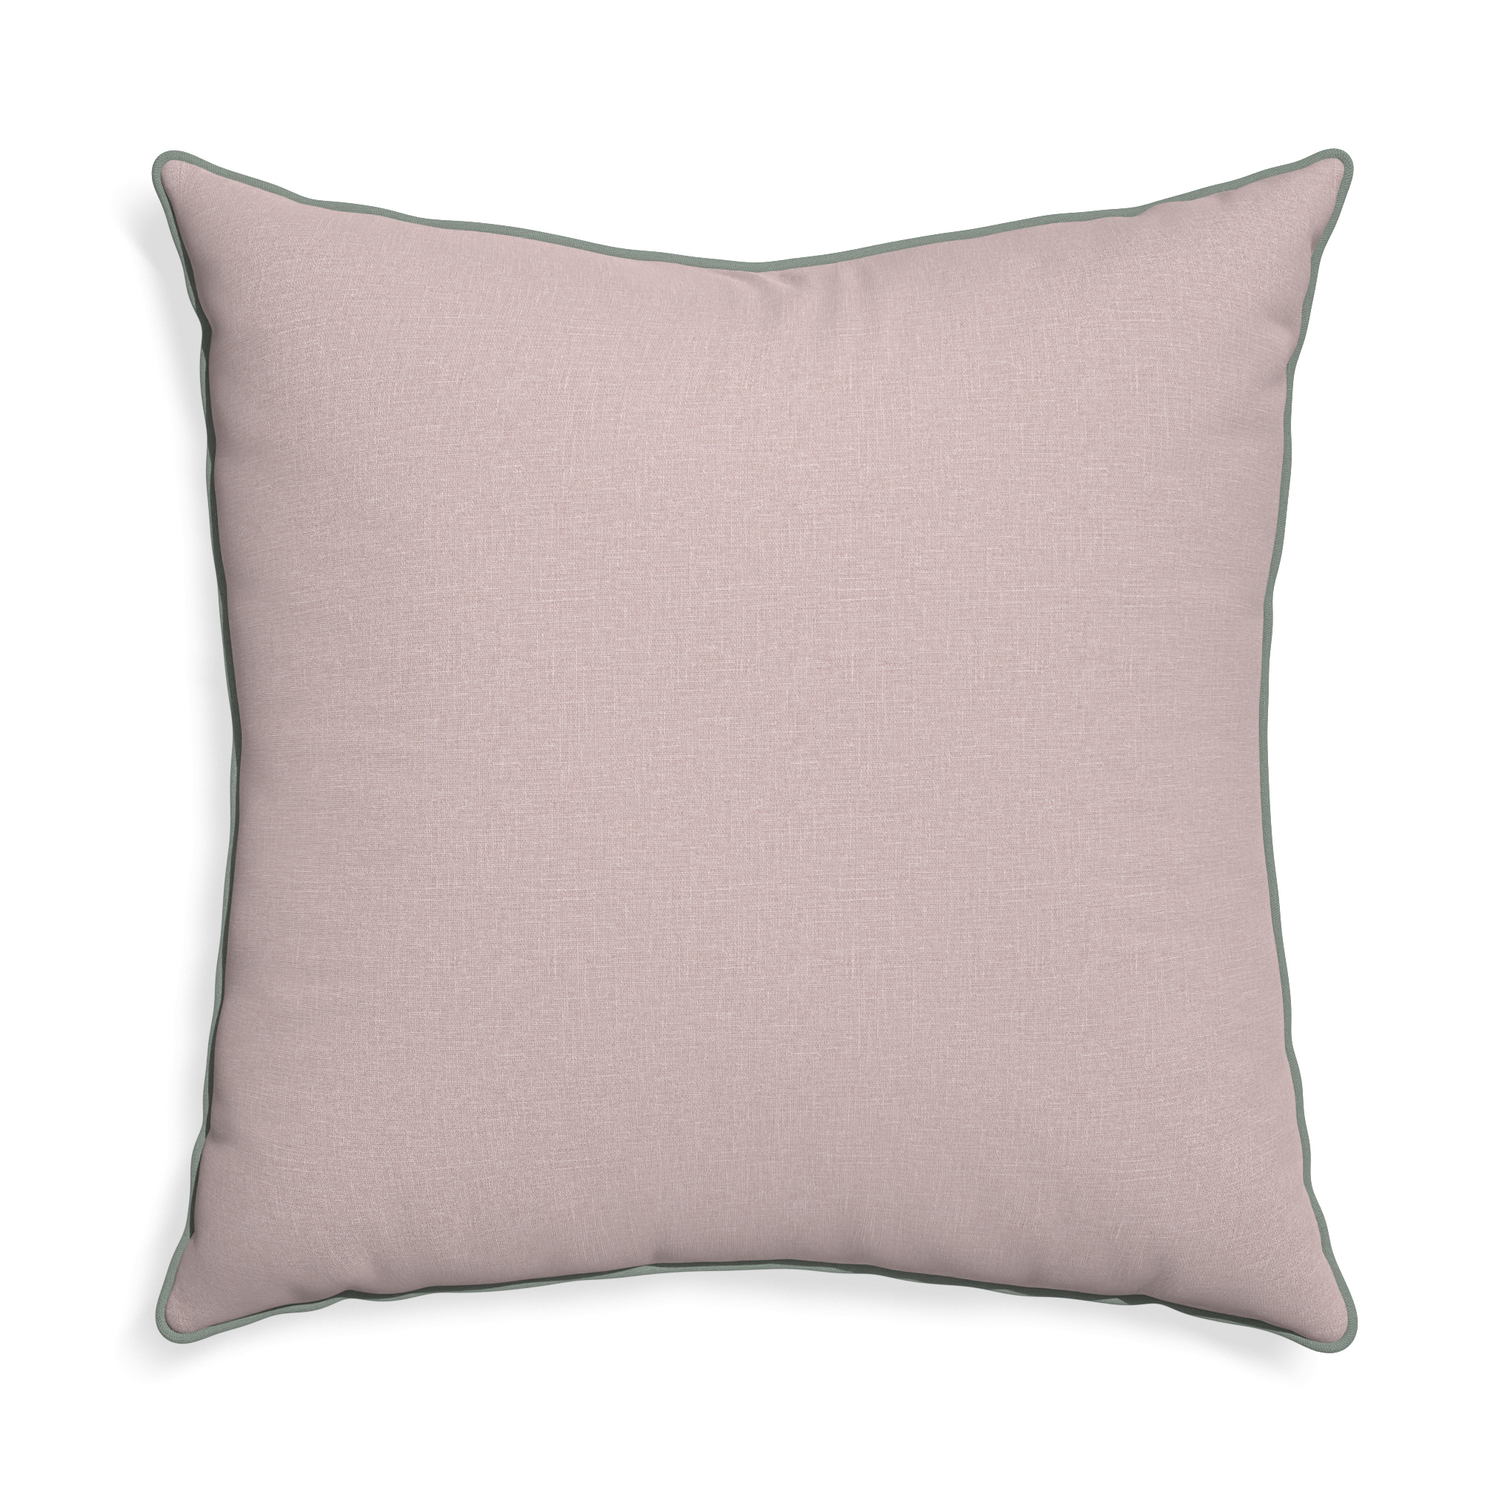 Euro-sham orchid custom mauve pinkpillow with sage piping on white background